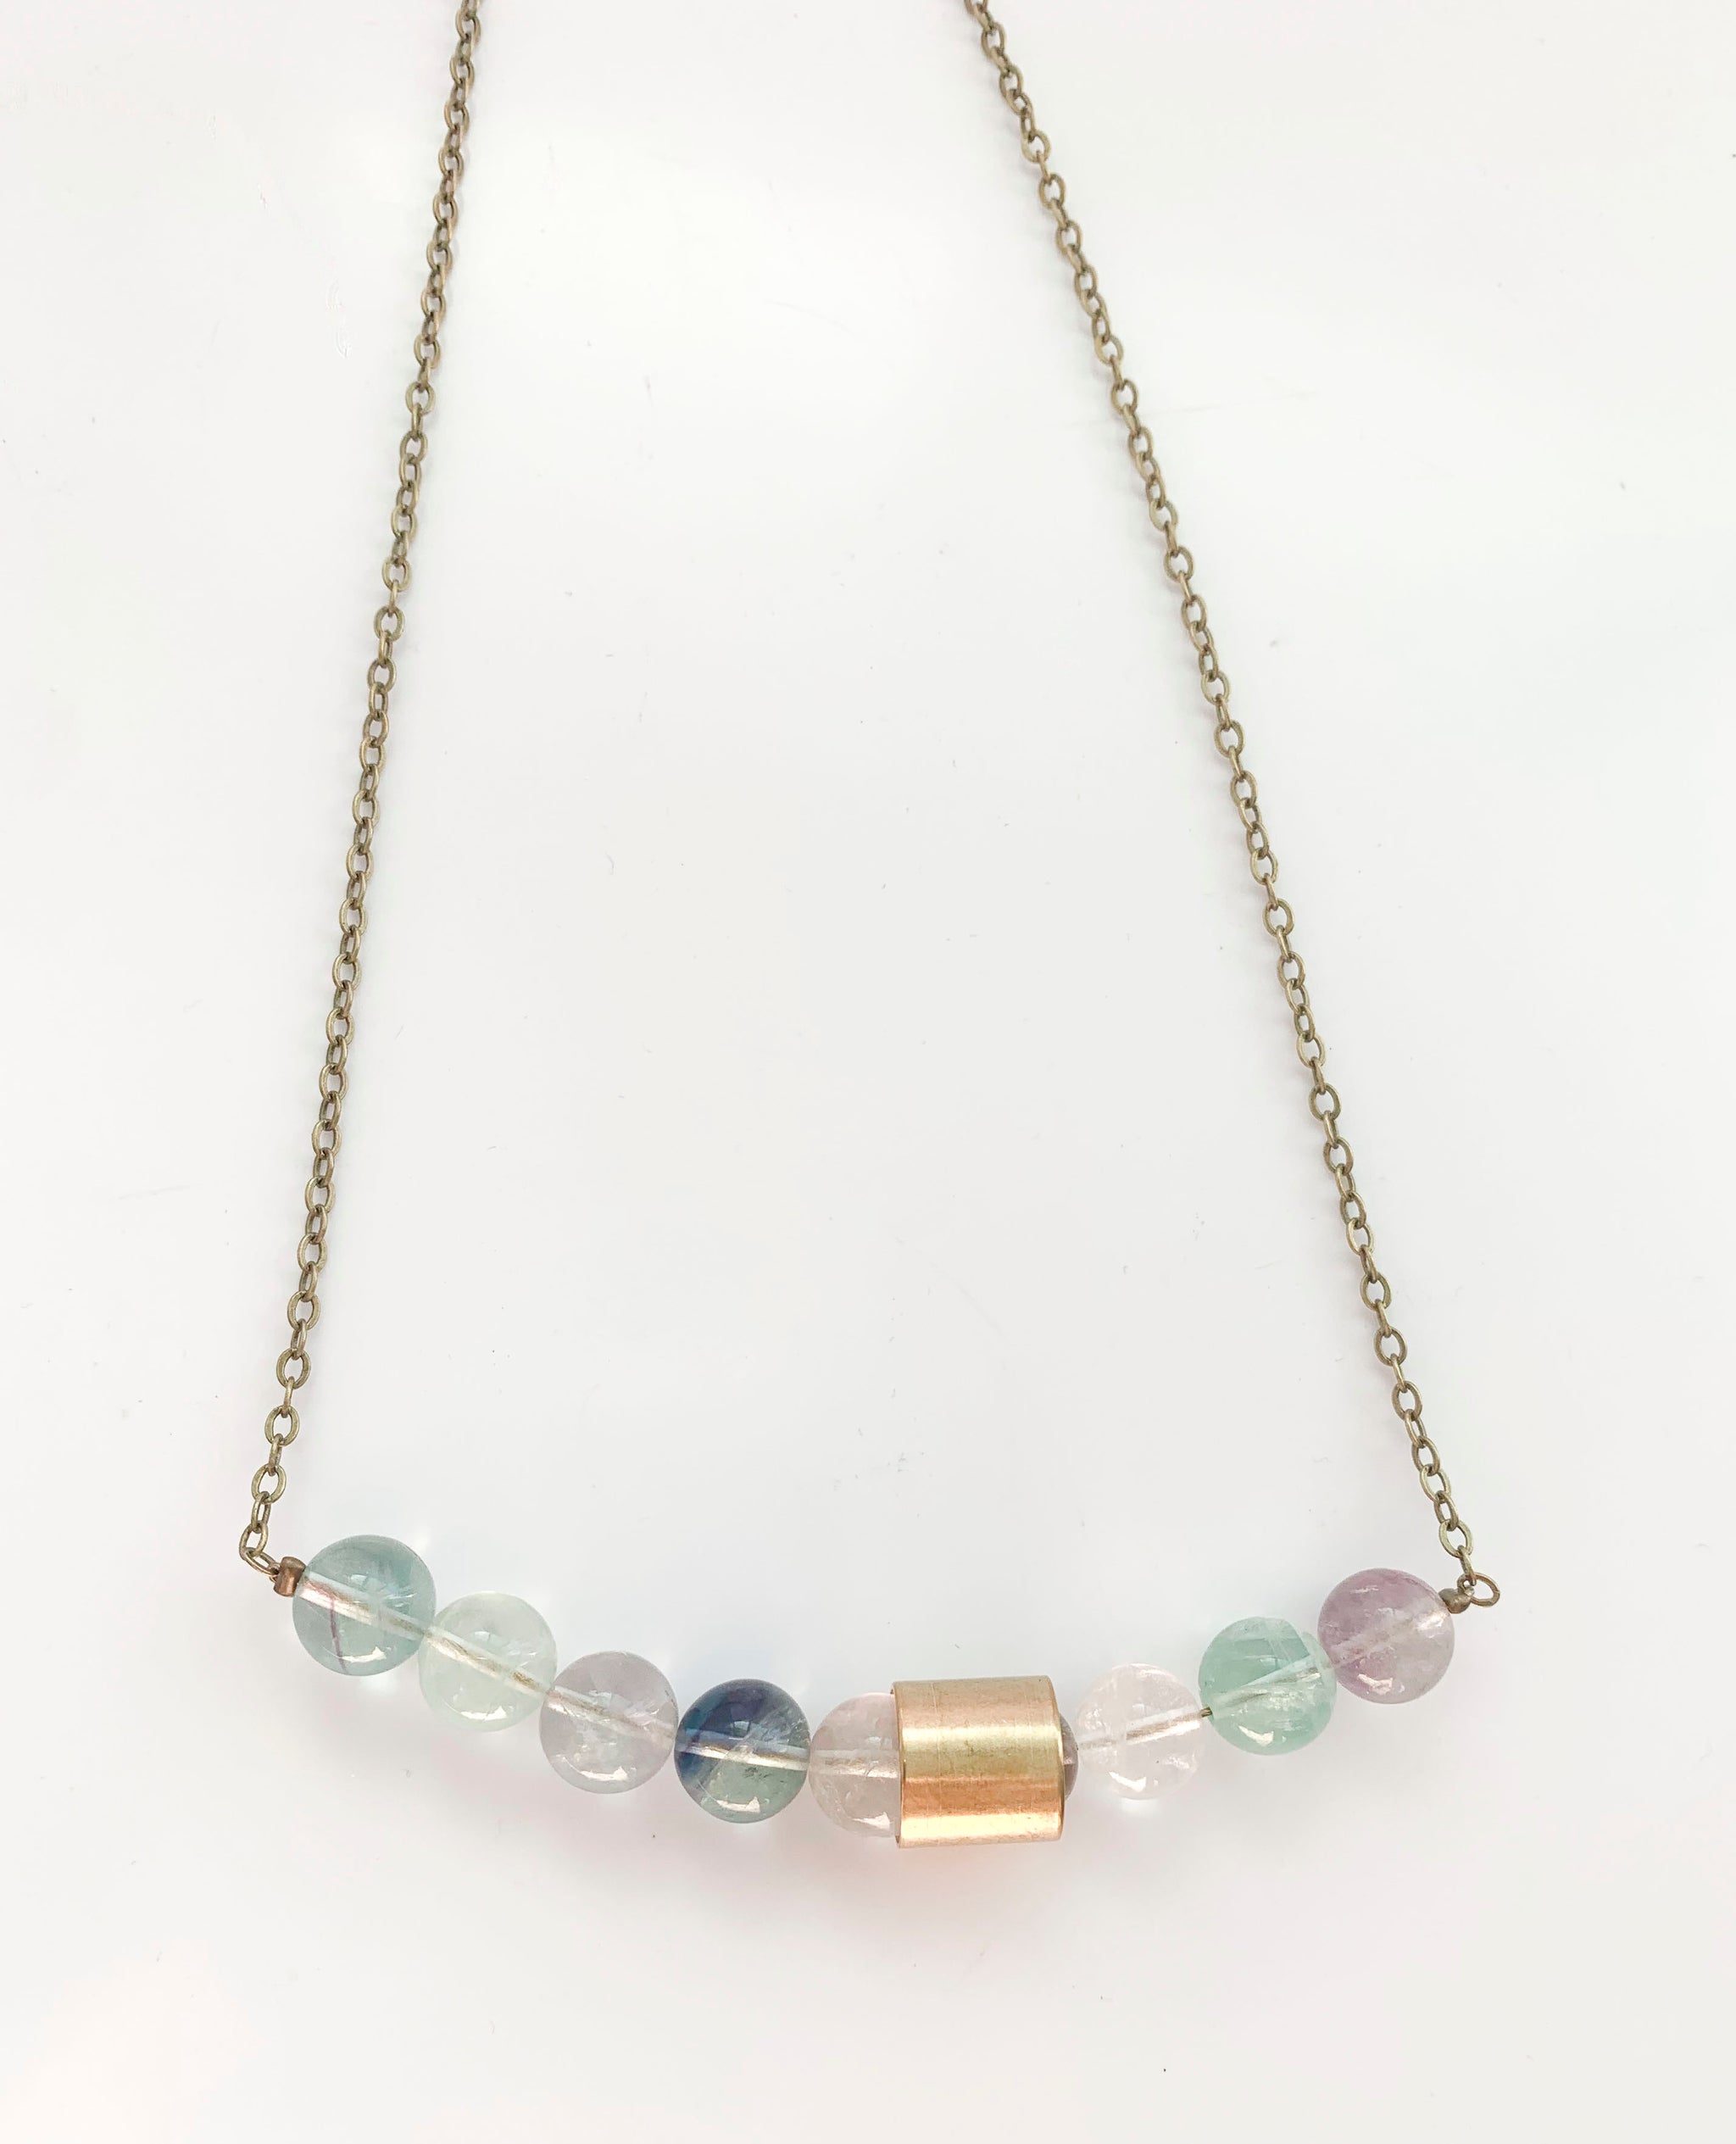 Movement & Sound Beaded Necklace - Grey Theory Mill